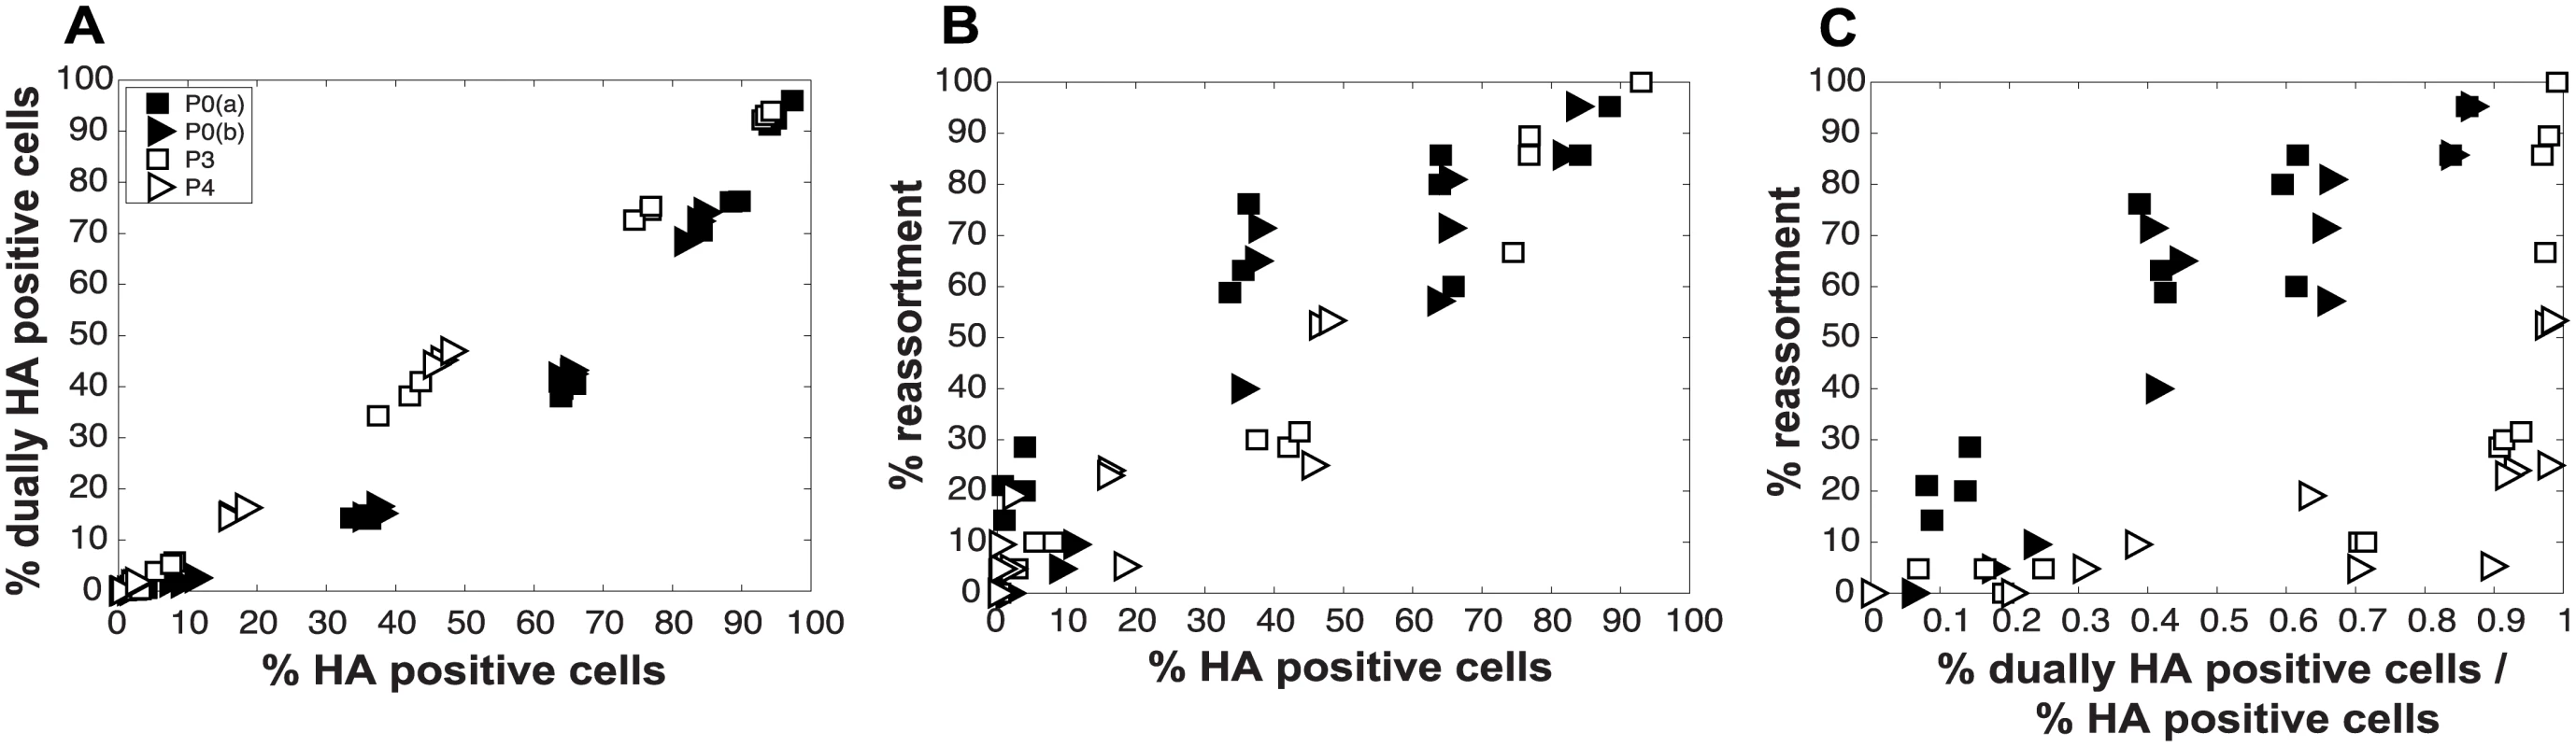 Virus populations dominated by DI particles give rise to a higher proportion of dually HA positive cells but a lower proportion of reassortant progeny viruses compared to virus populations with low DI content.